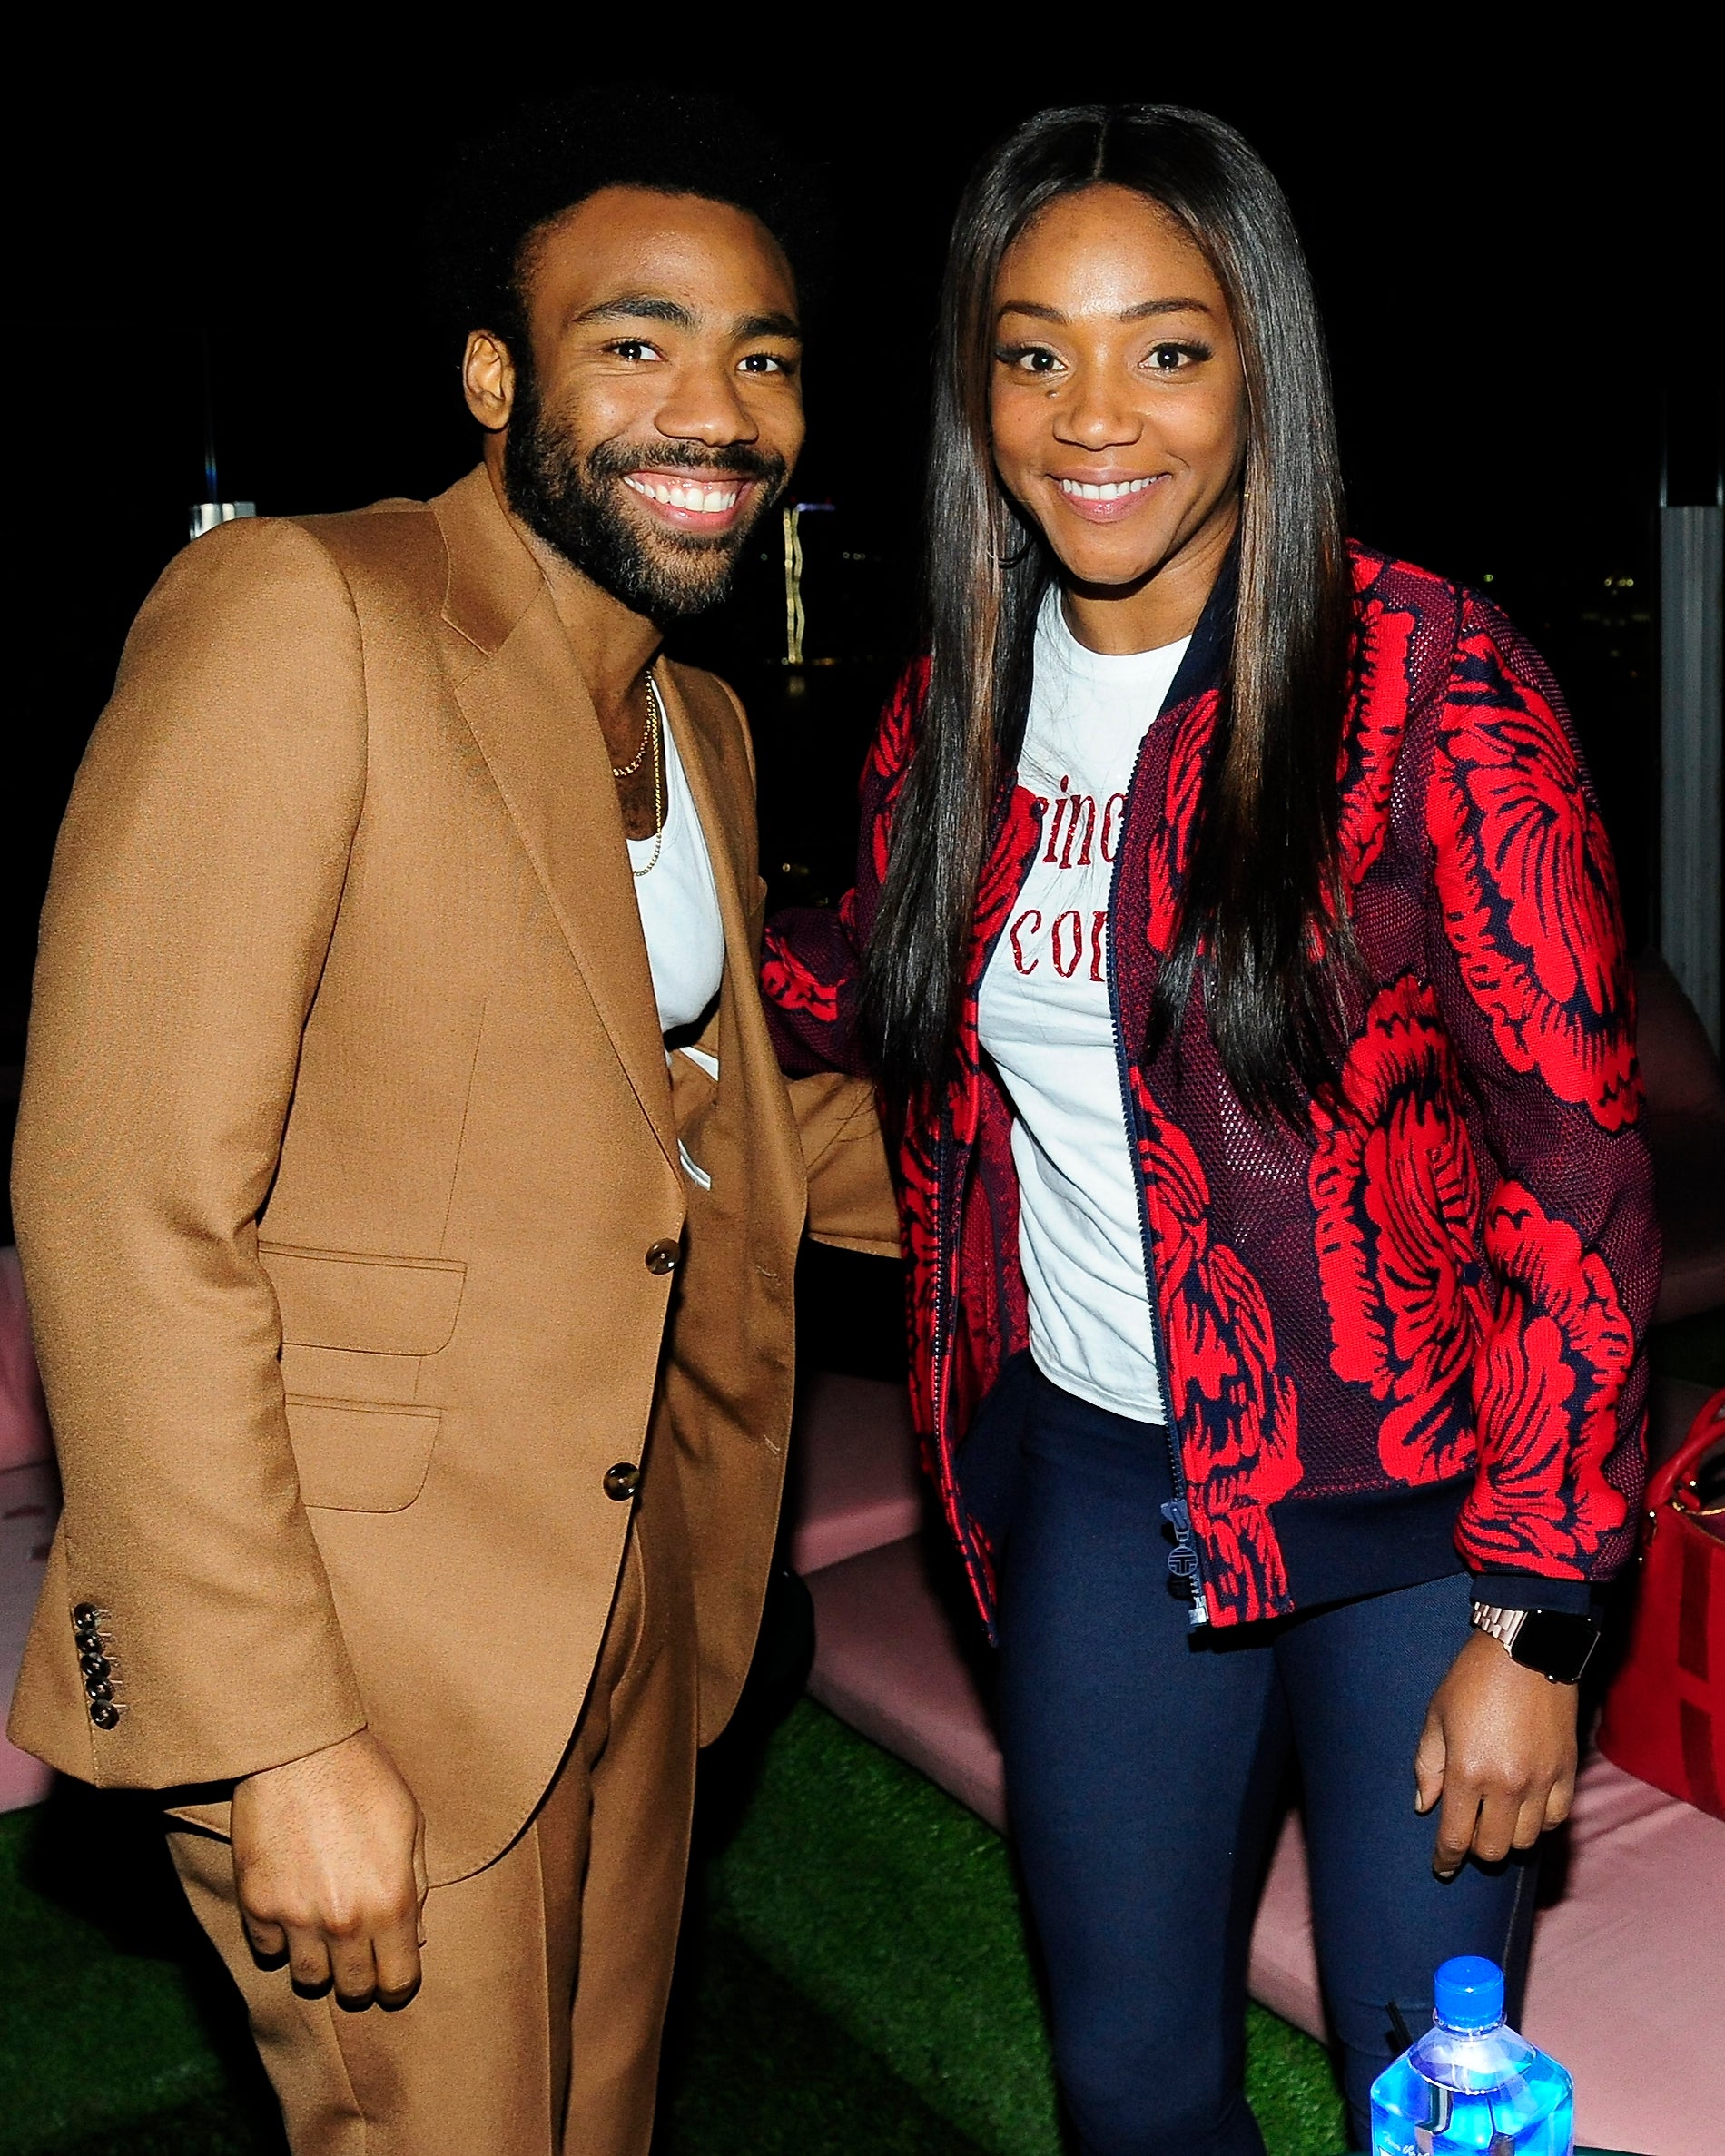 Angela Simmons, Queen Latifah, Teyana Taylor and More Celebs Out and About
